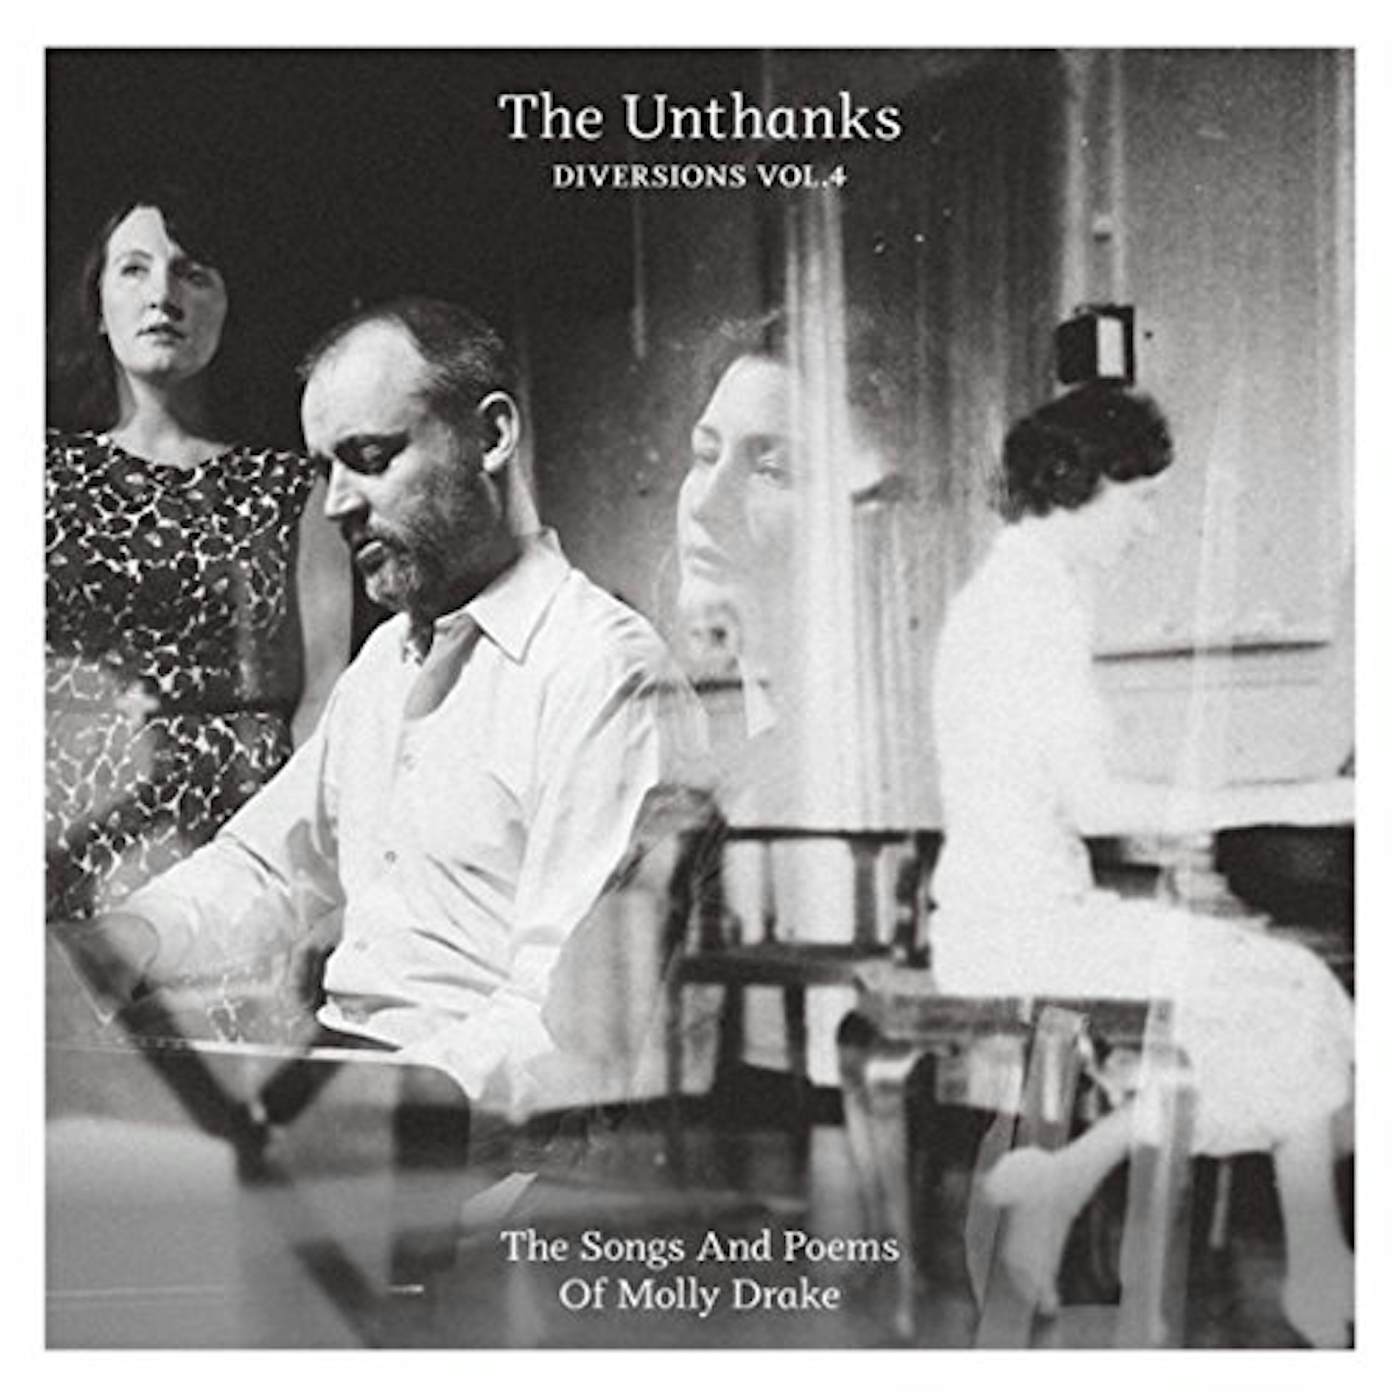 The Unthanks DIVERSIONS 4: SONGS AND POEMS OF MOLLY DRAKE CD